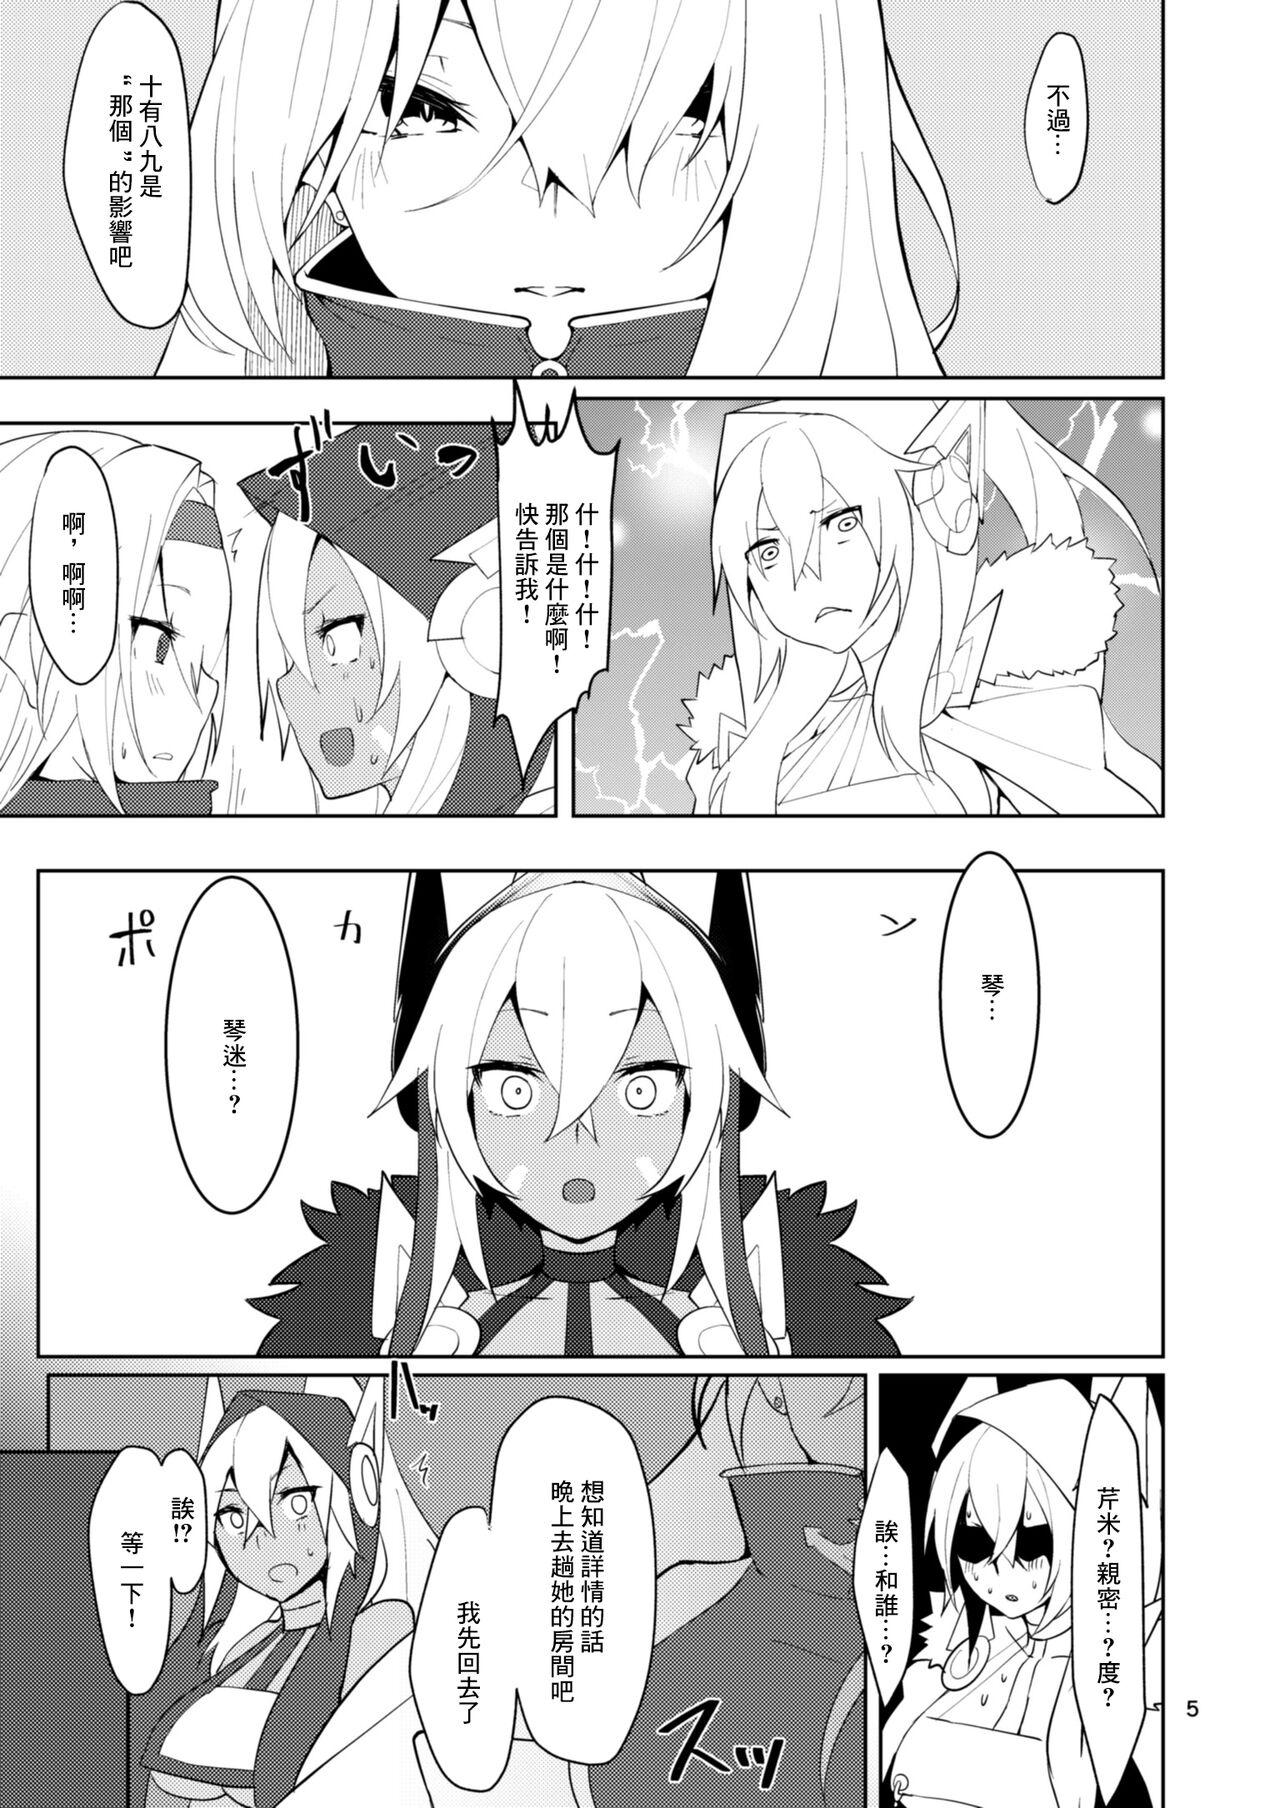 Oral Sex つよさの秘密 2nd - Azur lane Step - Page 4